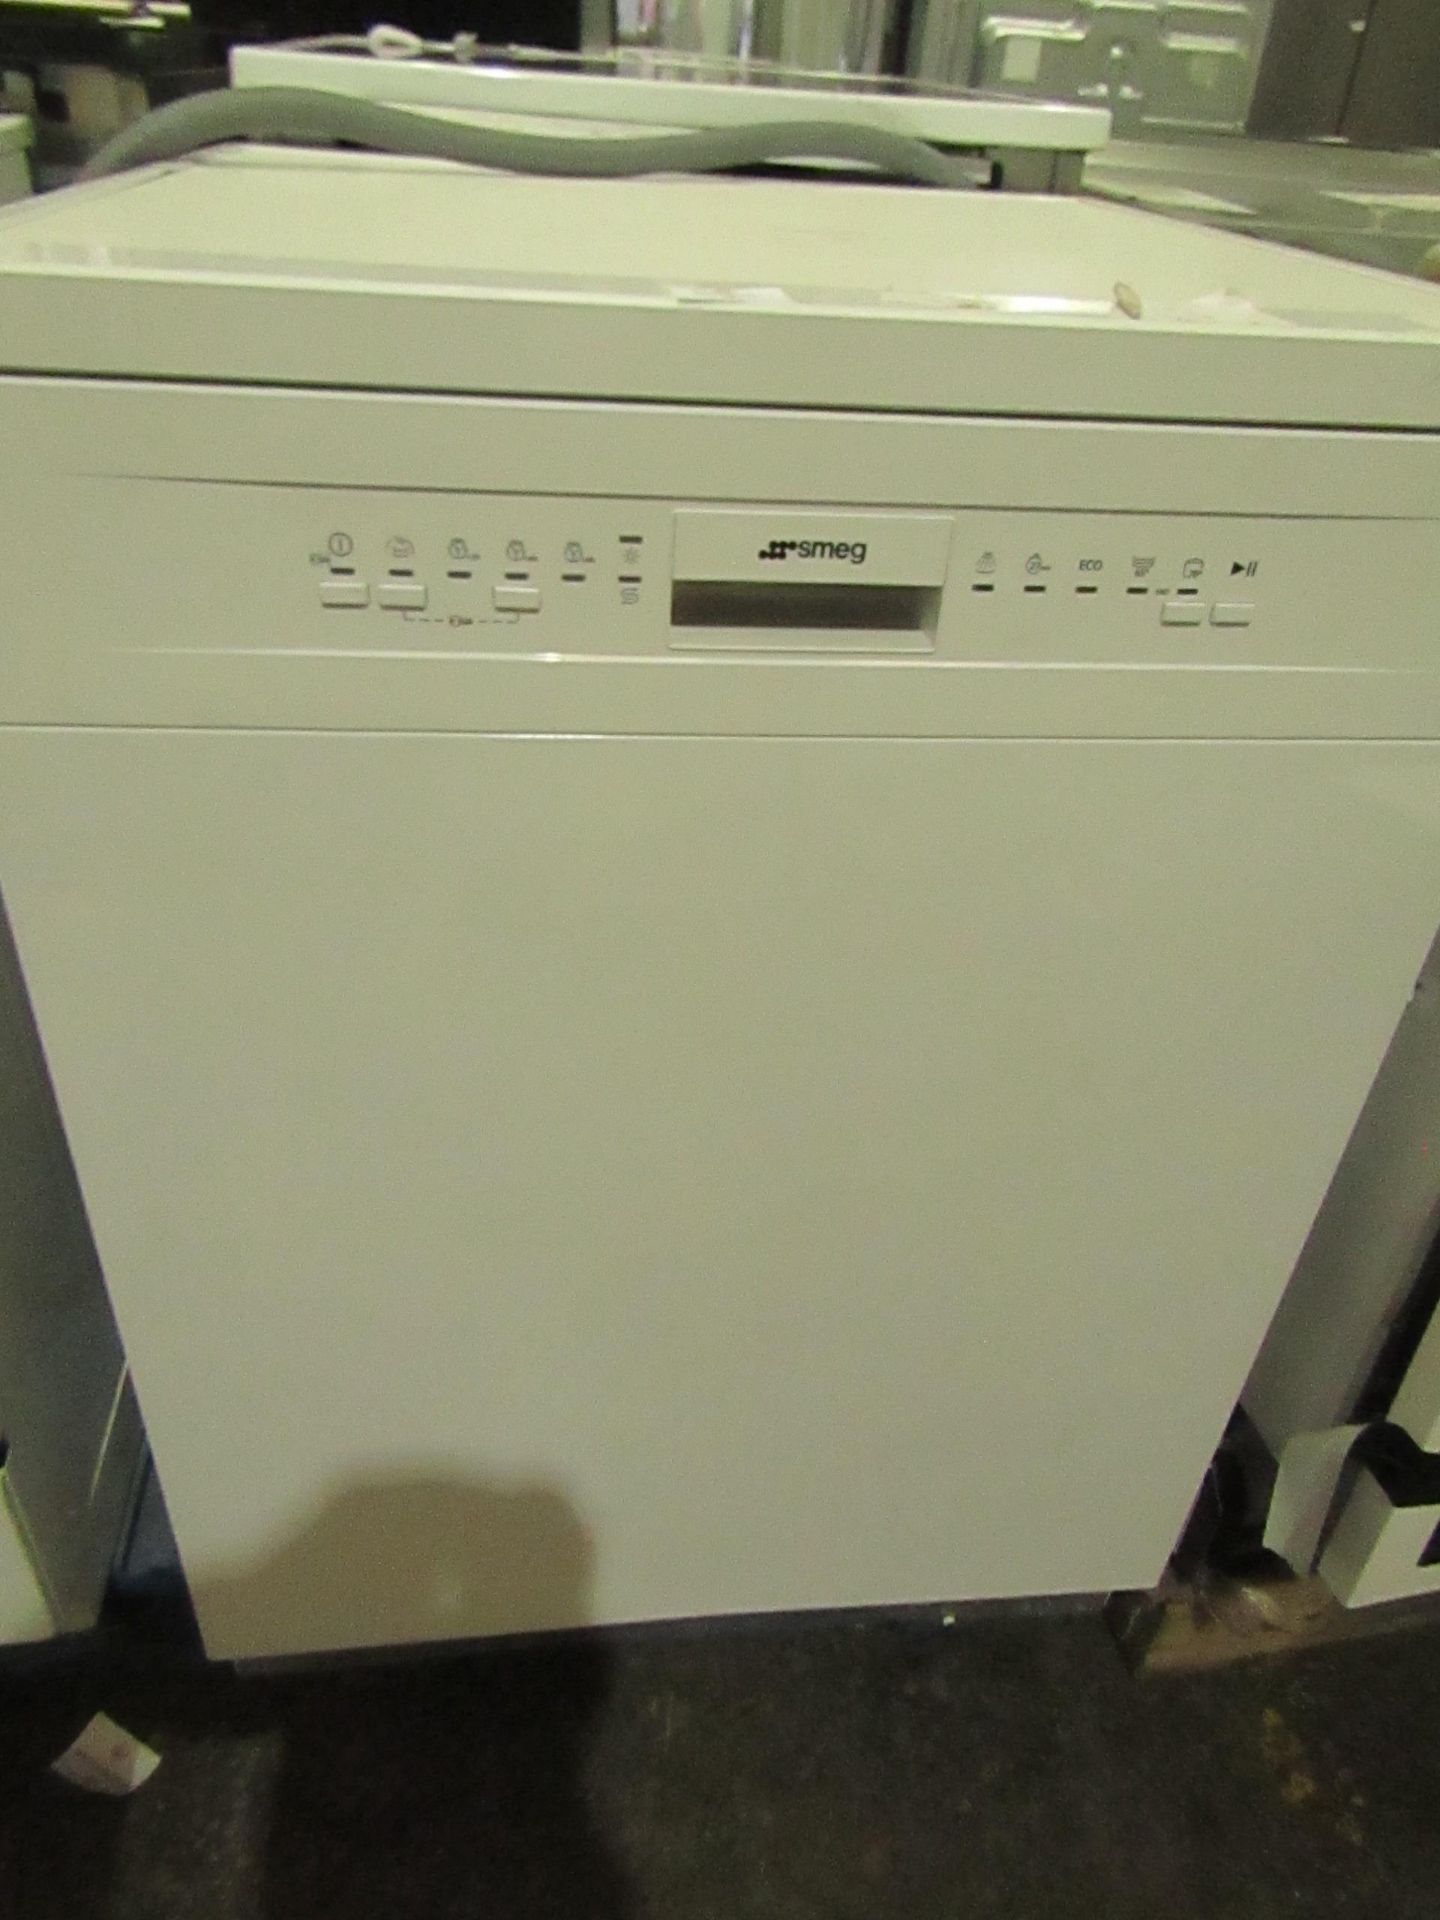 Smeg Freestanding dishwasher, powers on but we havent checked it any further